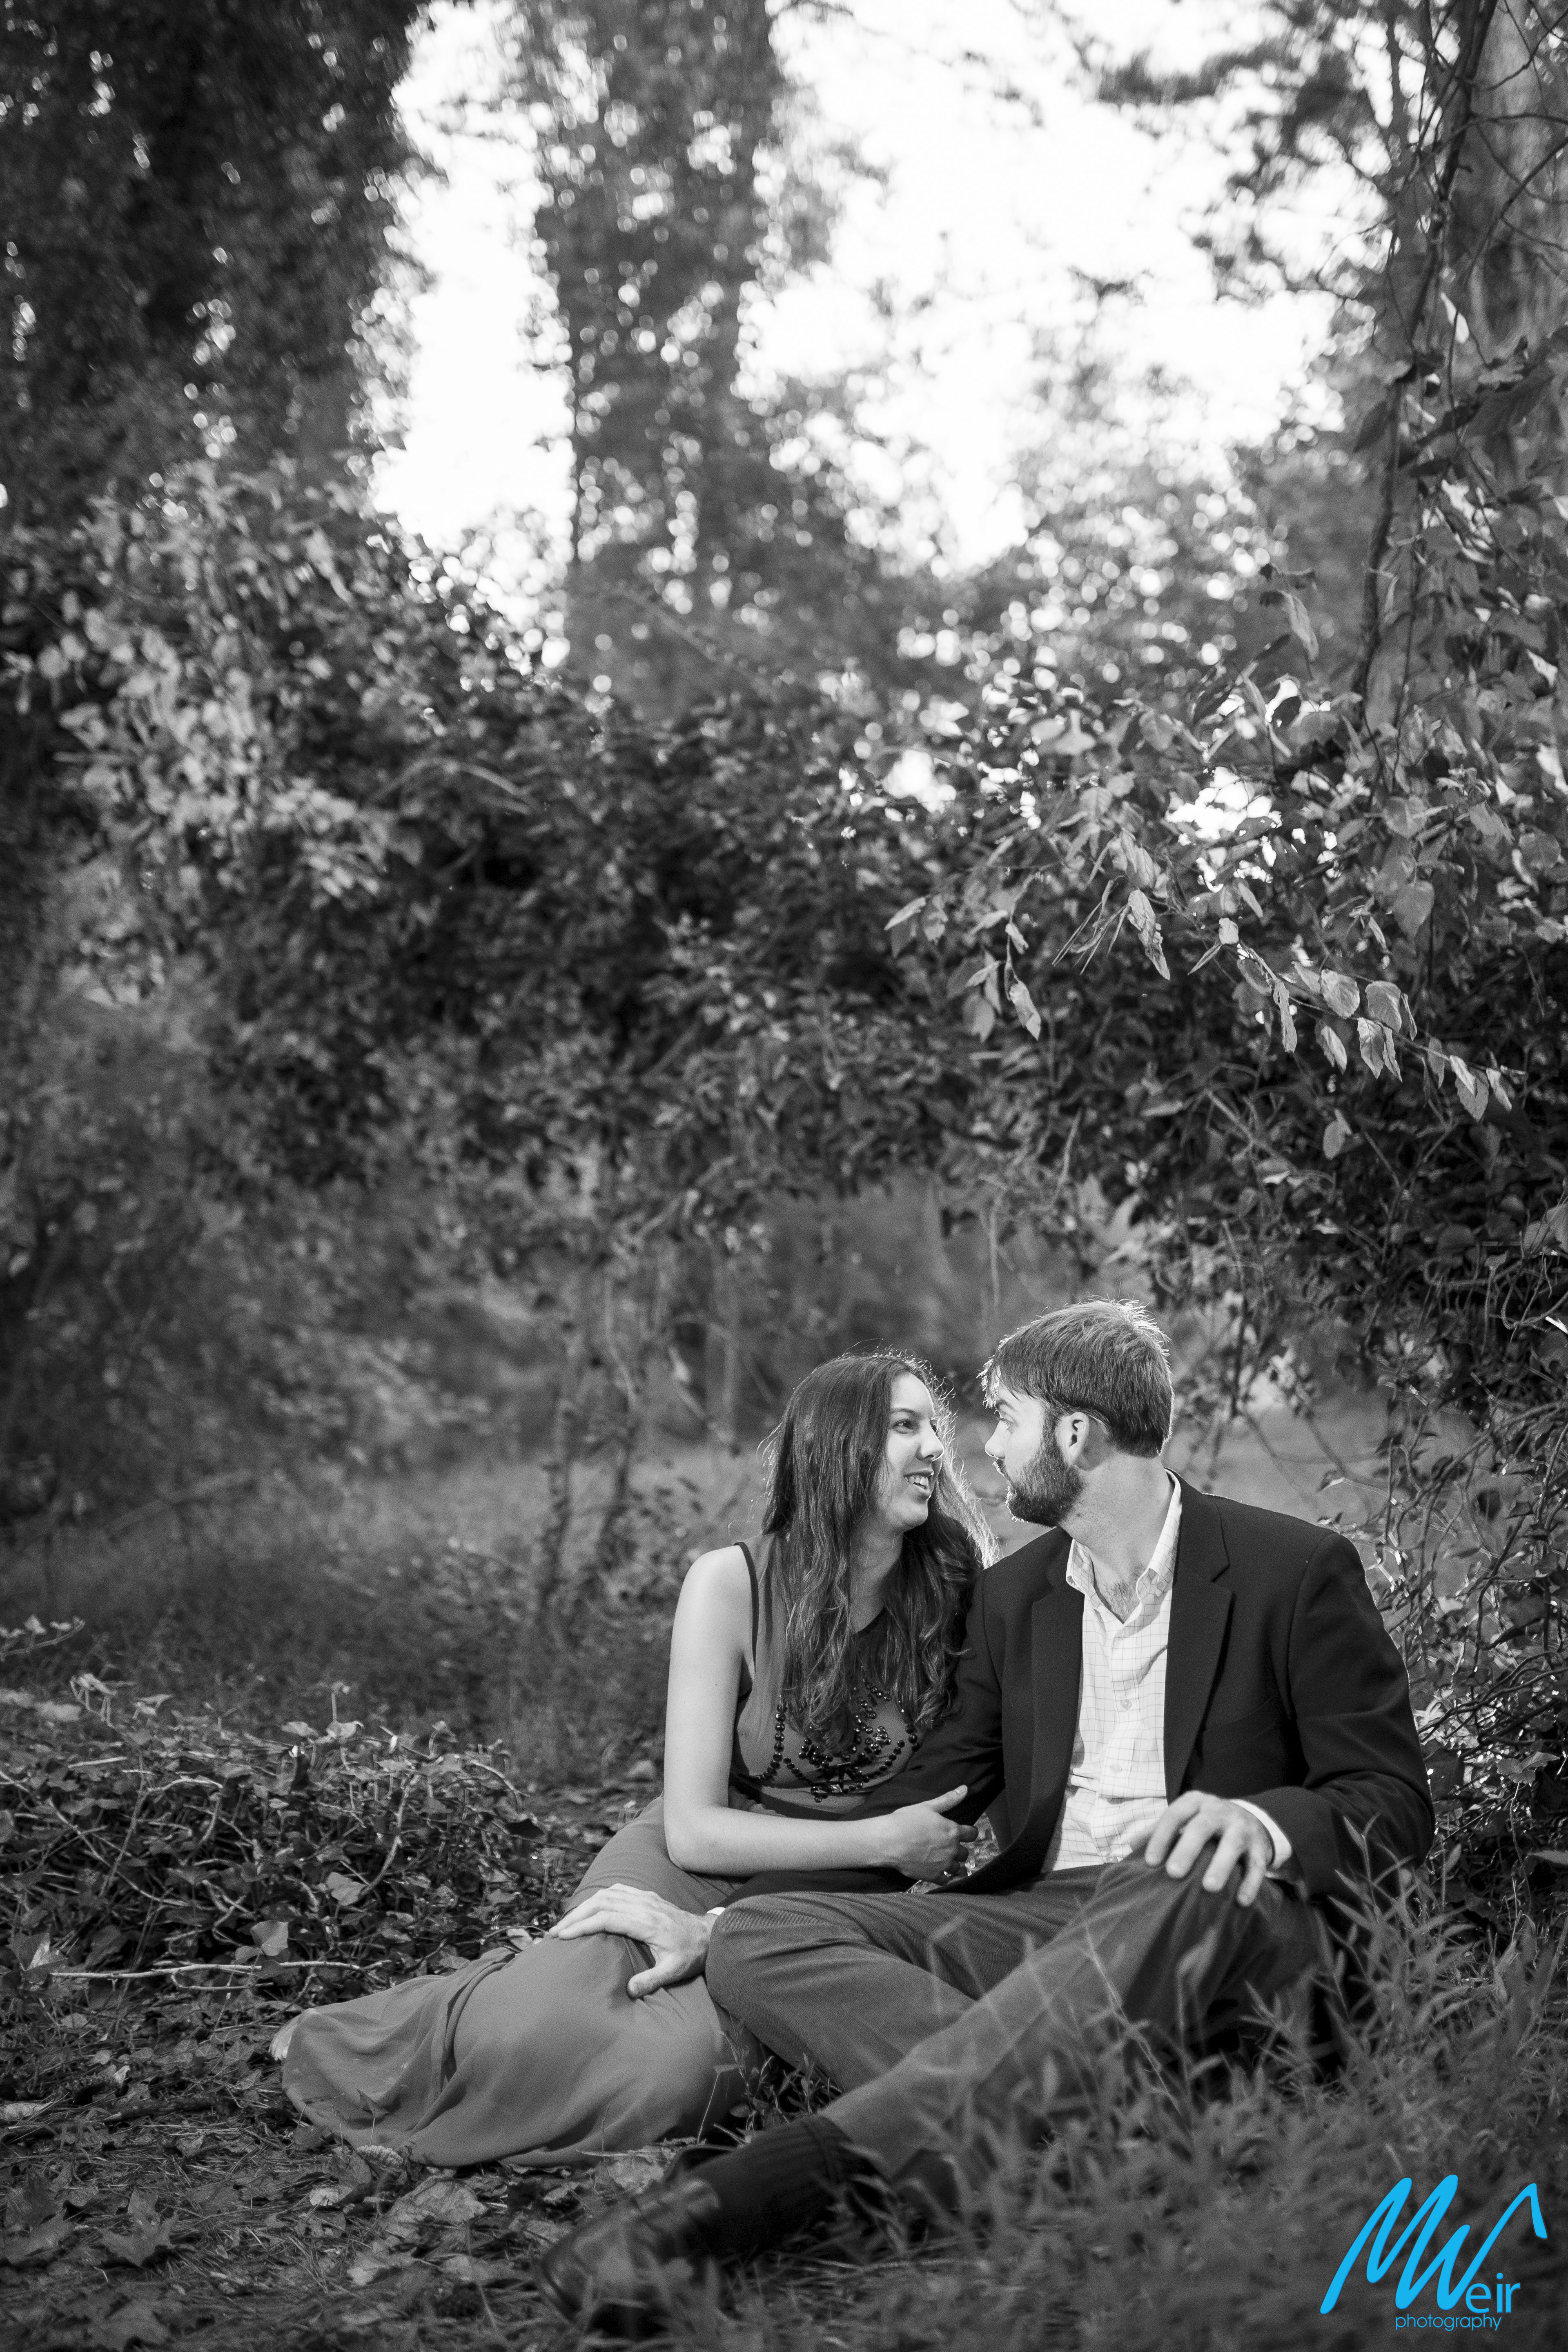 black and white image of engaged couple sitting in the grass under a low hanging tree